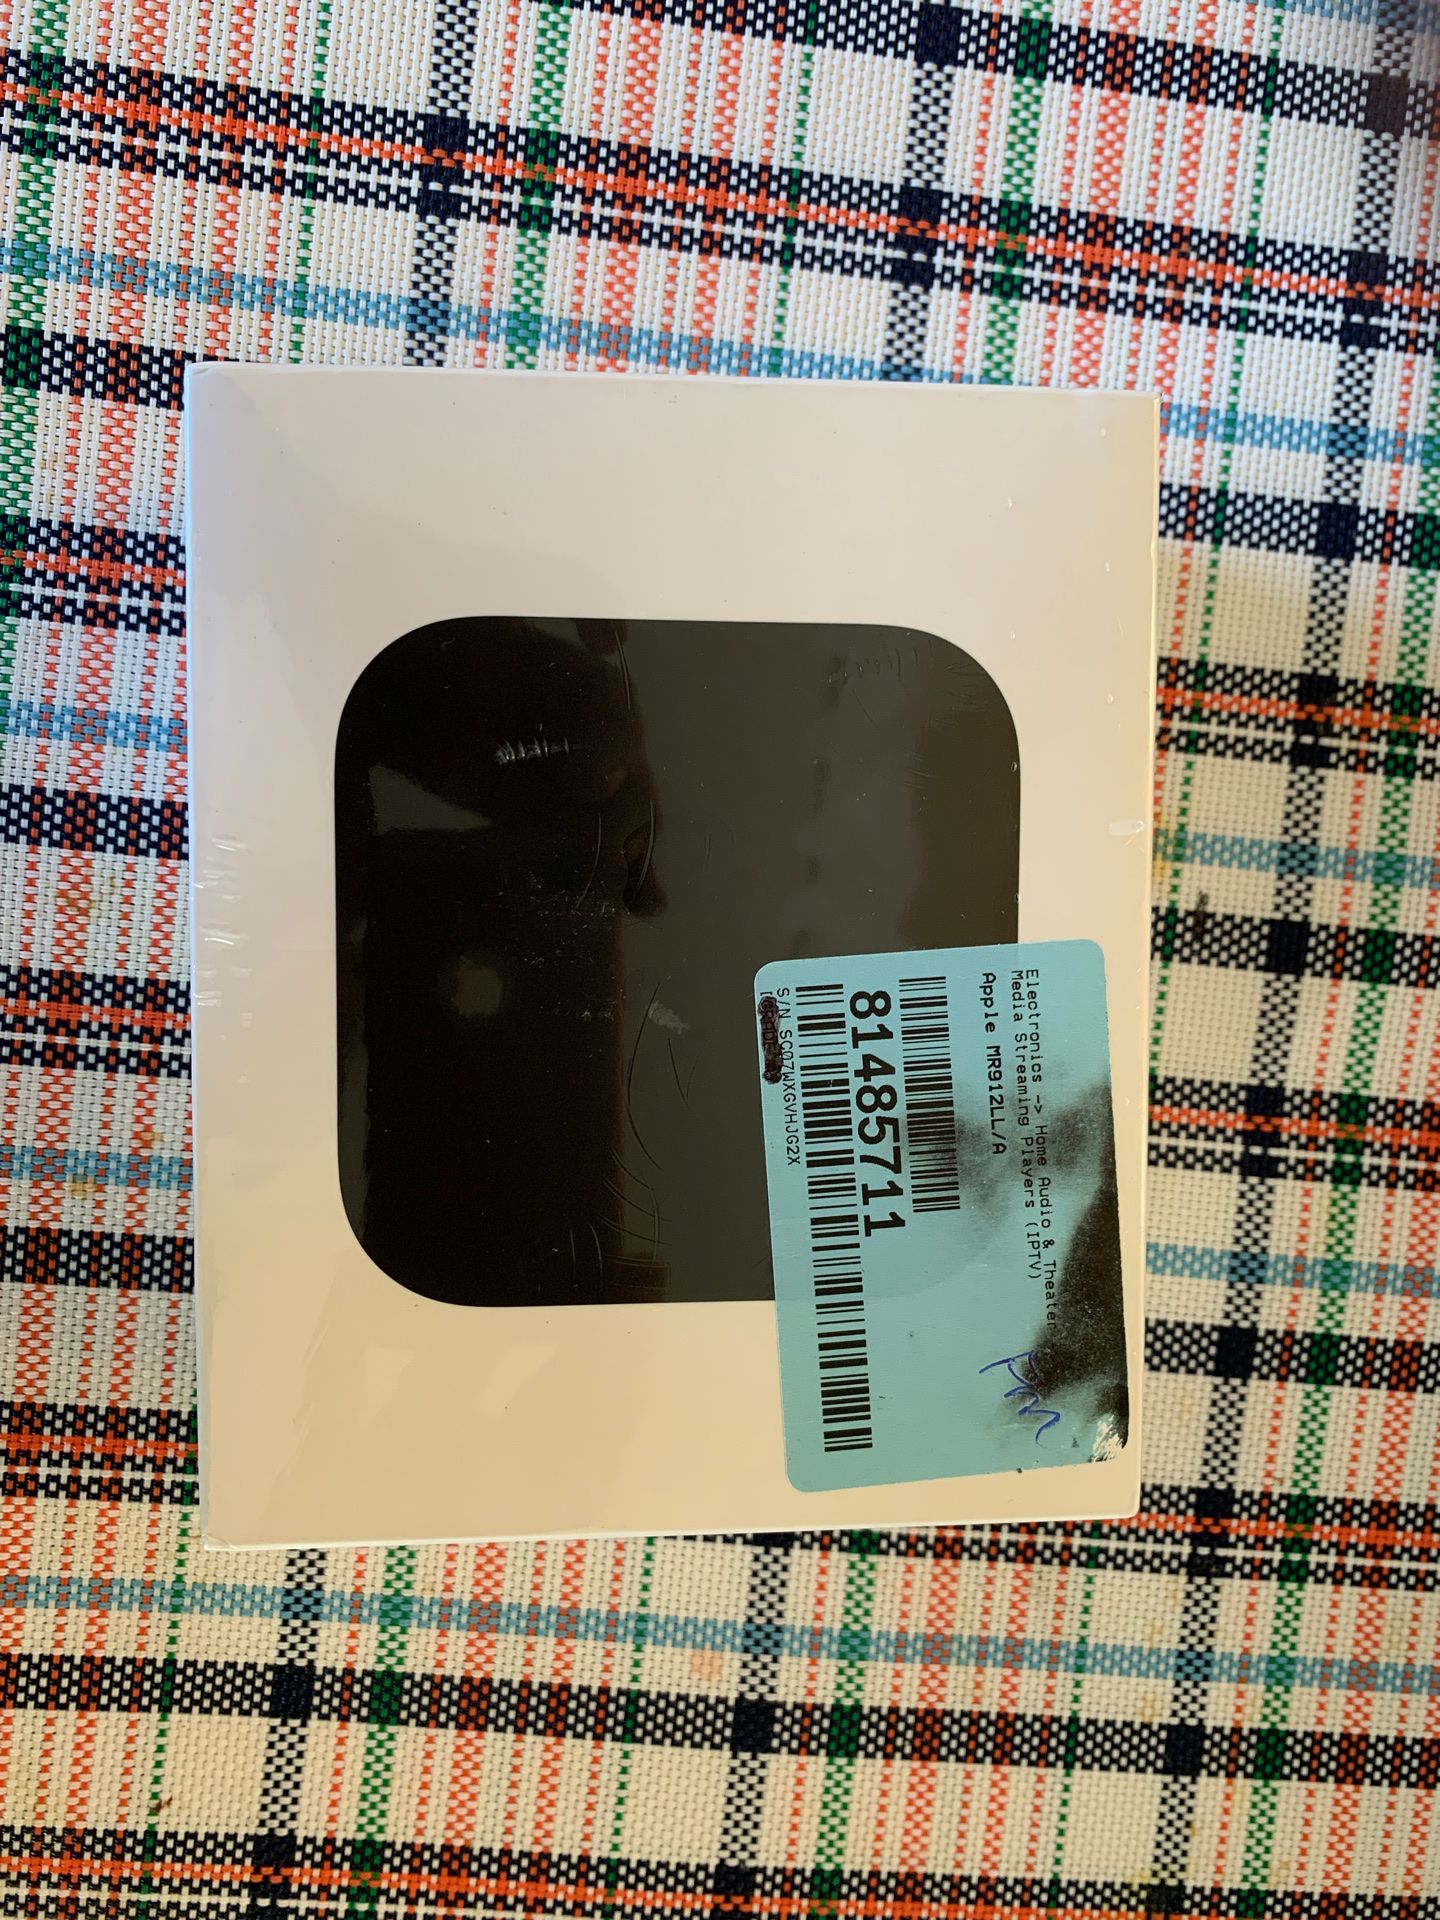 Apple TV 4th generation 32gb MR912LL/A sealed new condition